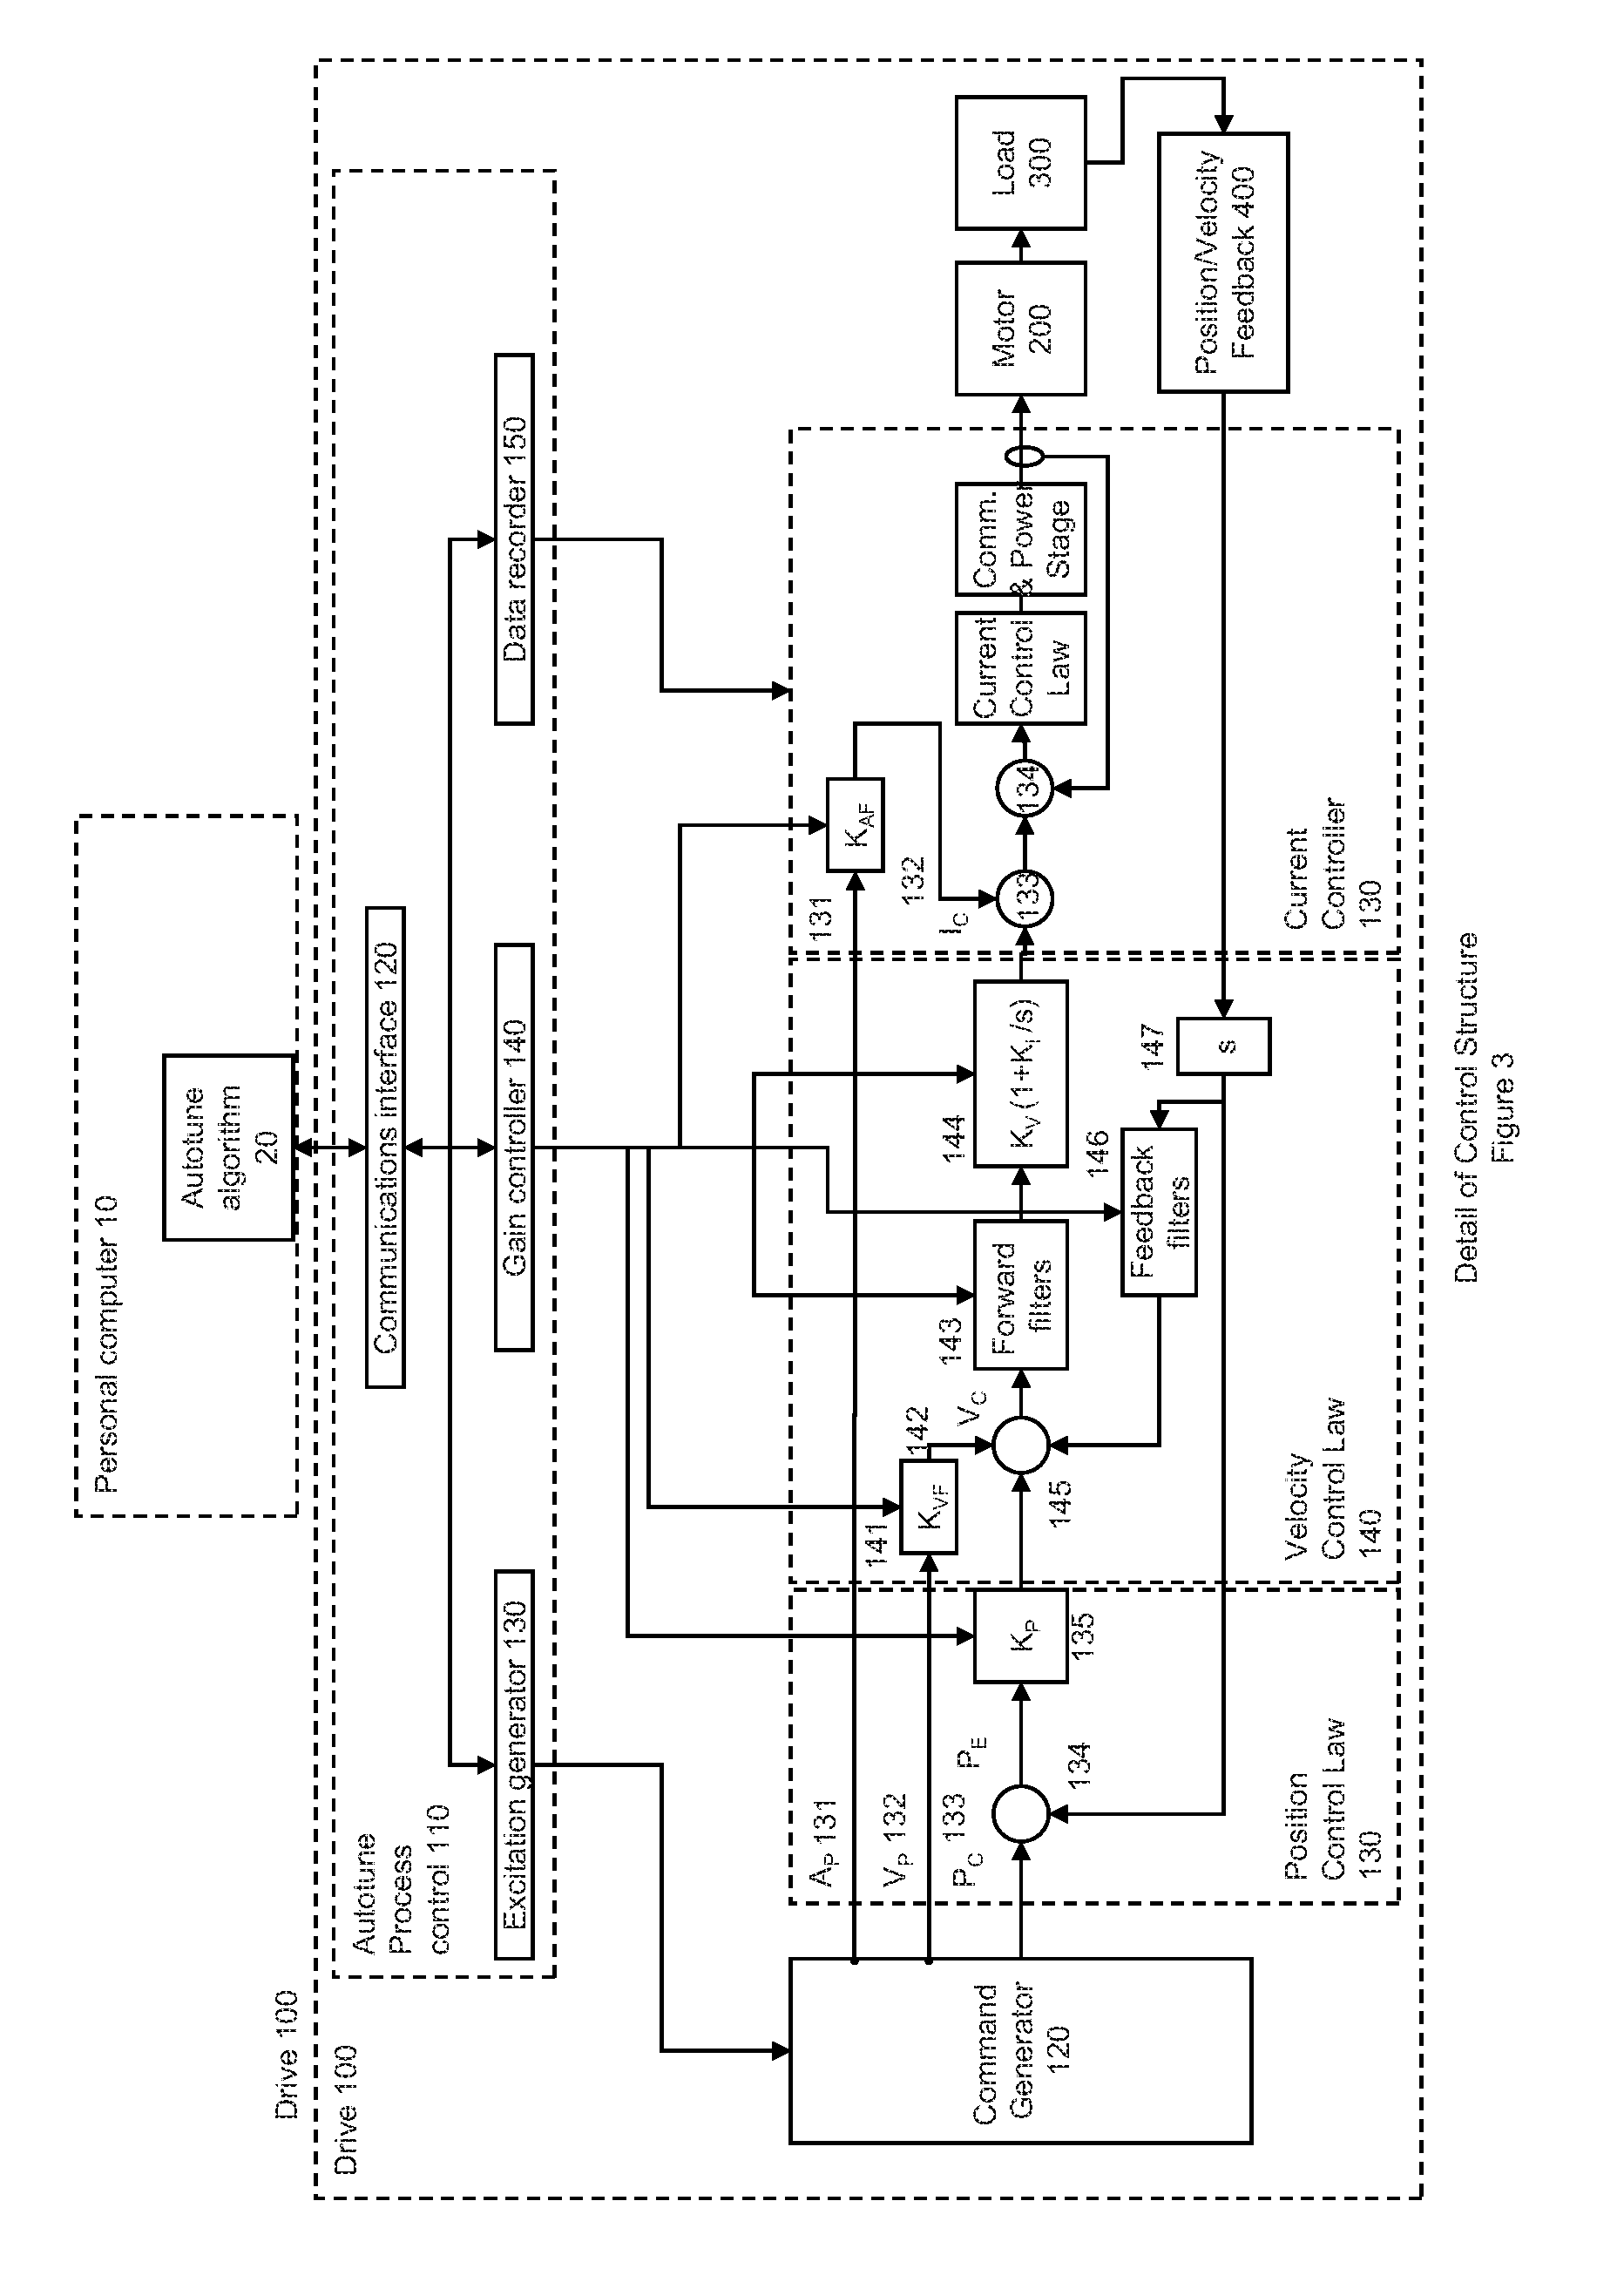 Auto-tune of a control system based on frequency response